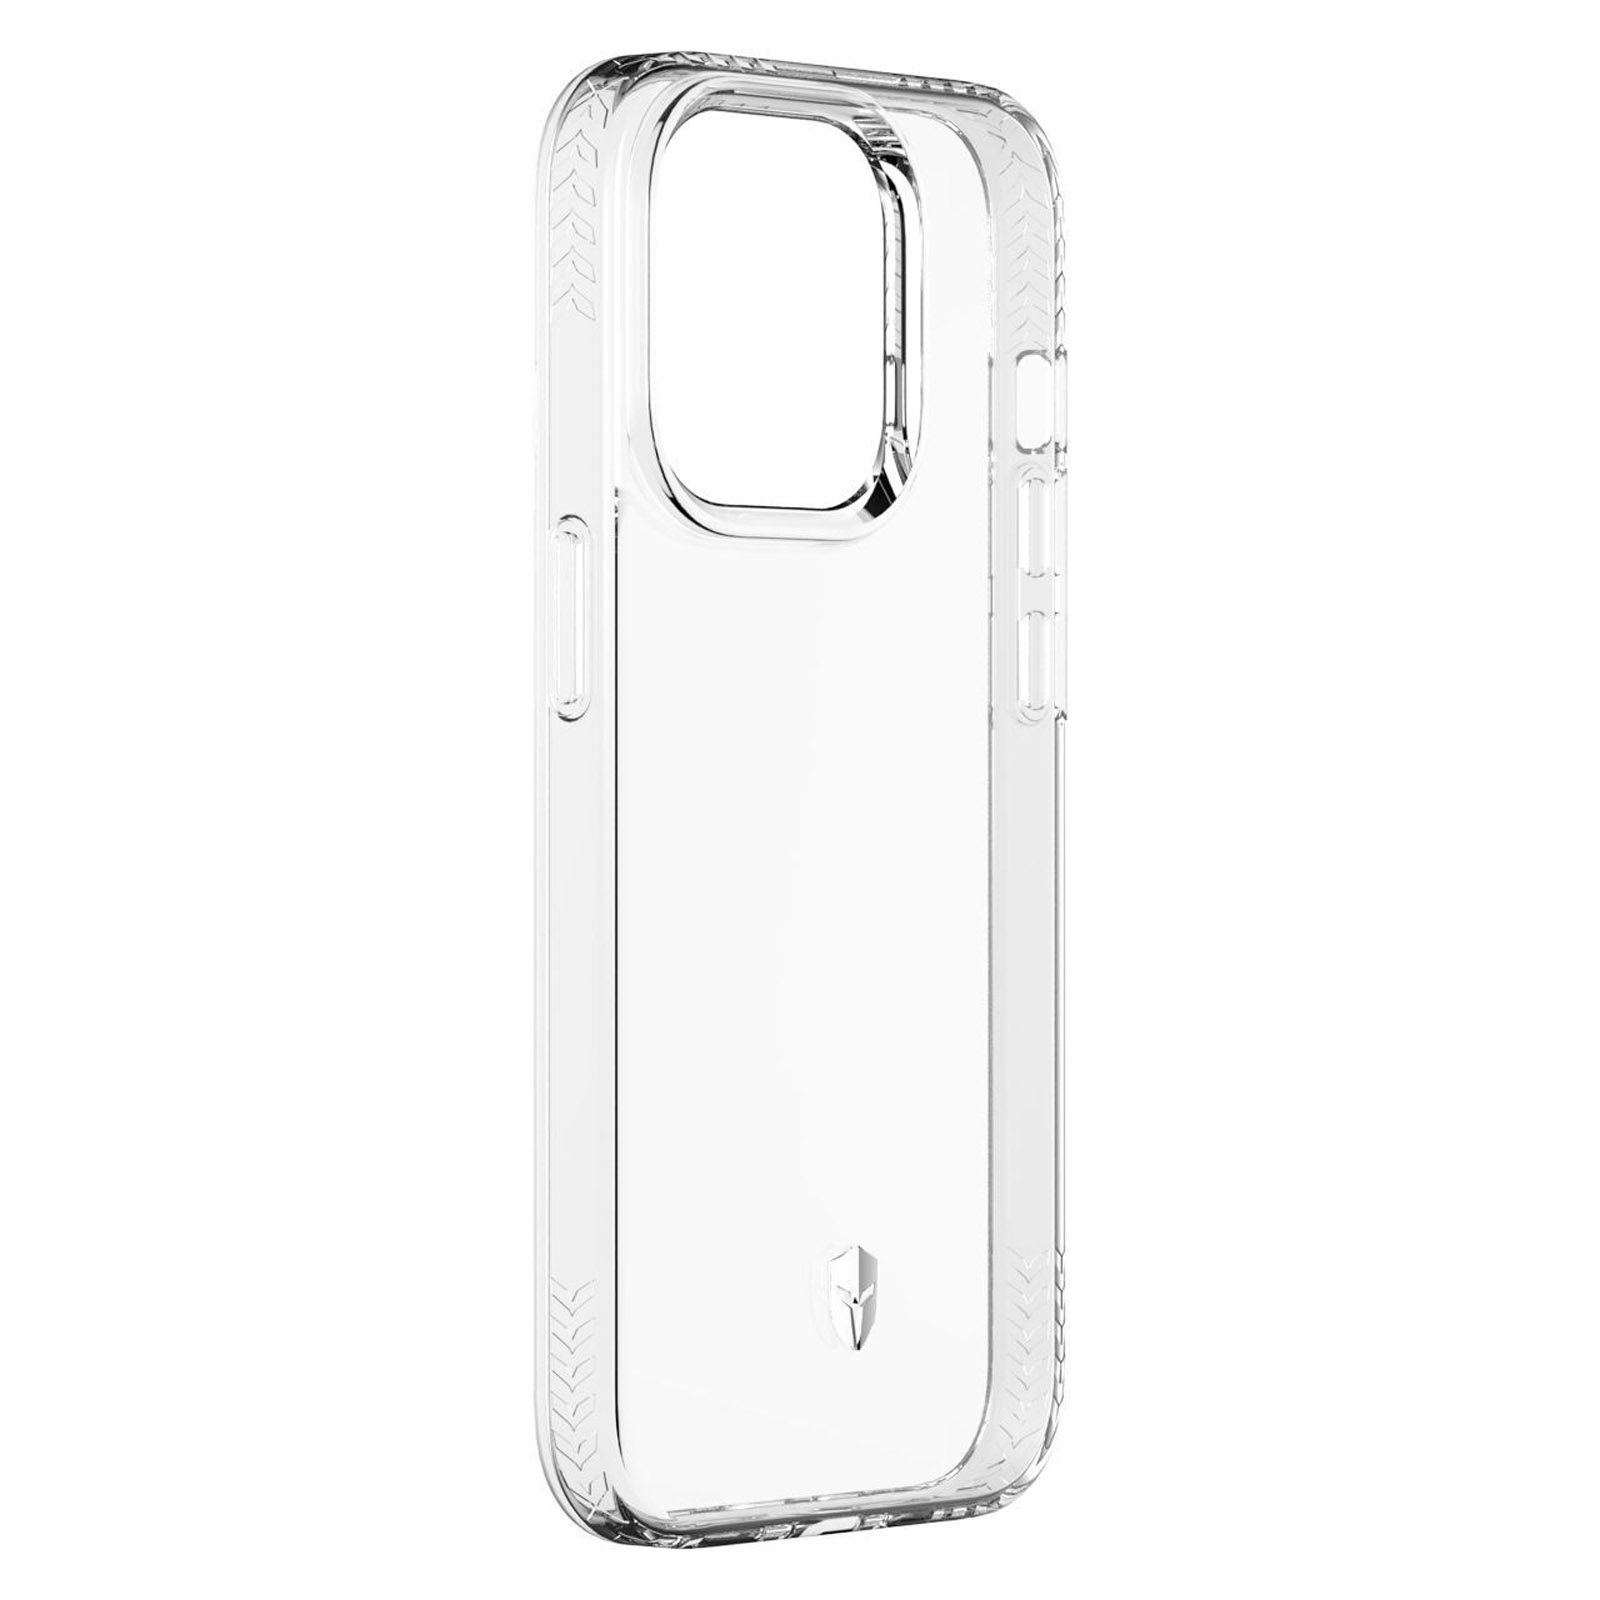 14 Pulse Pro CASE FORCE Apple, iPhone Backcover, Max, Transparent Series, Handyhülle